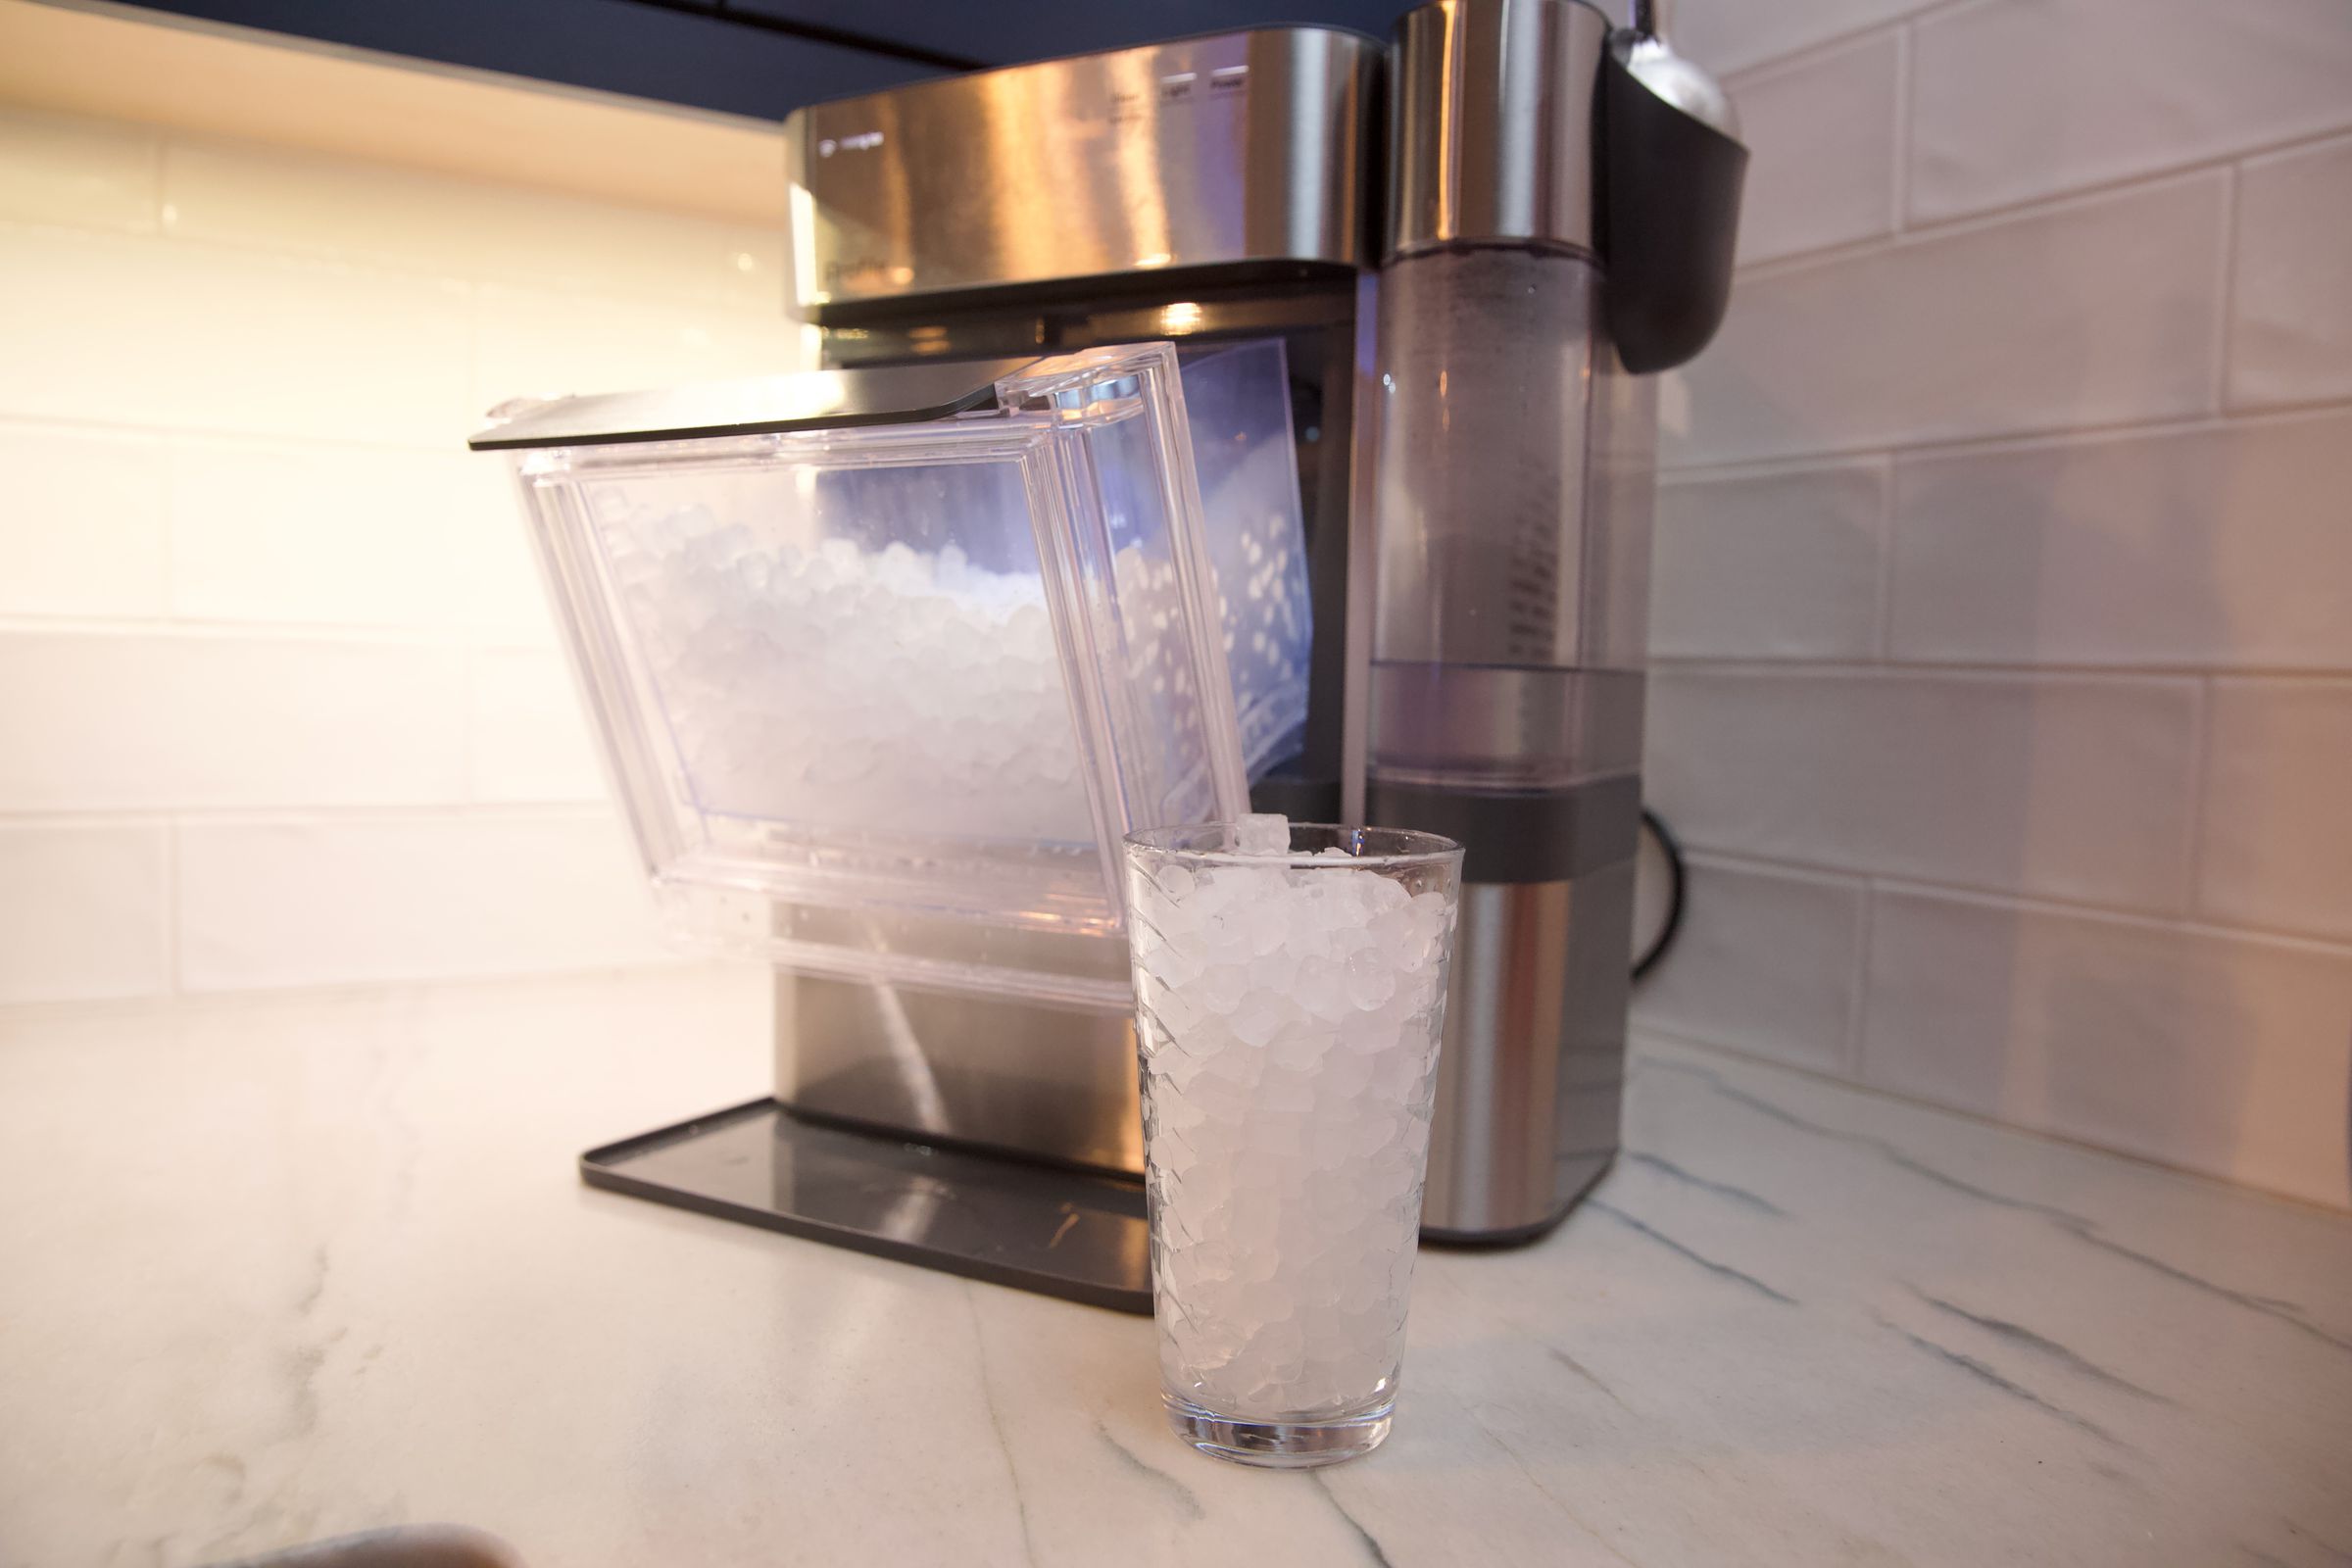 GE Profile’s newest nugget ice maker is an expensive upgrade to your summer drinks, but for some, it may be worth it.